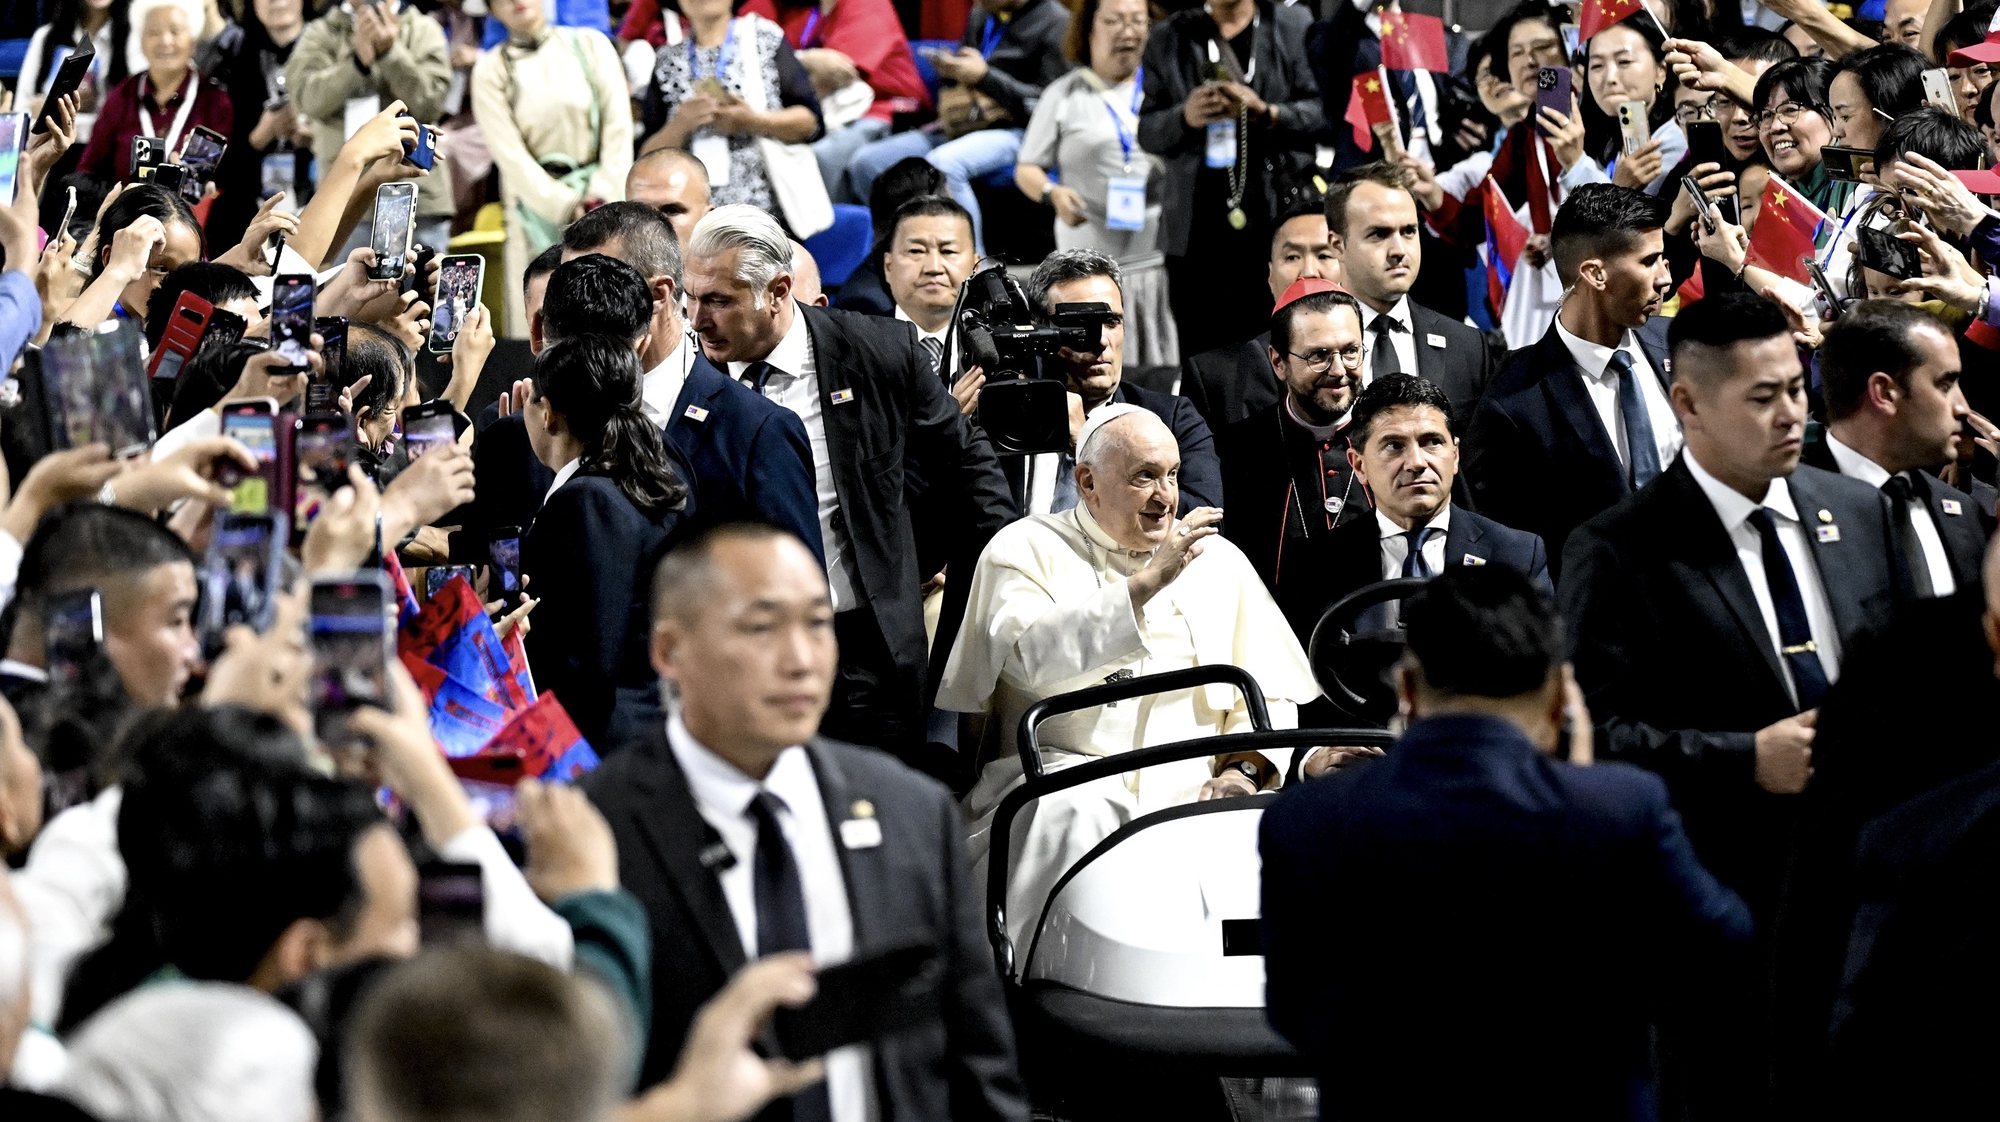 epa10837241 Pope Francis (C) waves as he arrives at the &#039;Steppe arena&#039; sports stadium to celebrate a Holy Mass, in the city of Ulaanbaatar, Mongolia, 03 September 2023. Pope Francis on 01 September landed in Mongolia&#039;s capital Ulaanbaatar to start his 43rd international apostolic journey to Mongolia, under the motto &#039;Hoping Together&#039;, until 04 September.  EPA/CIRO FUSCO